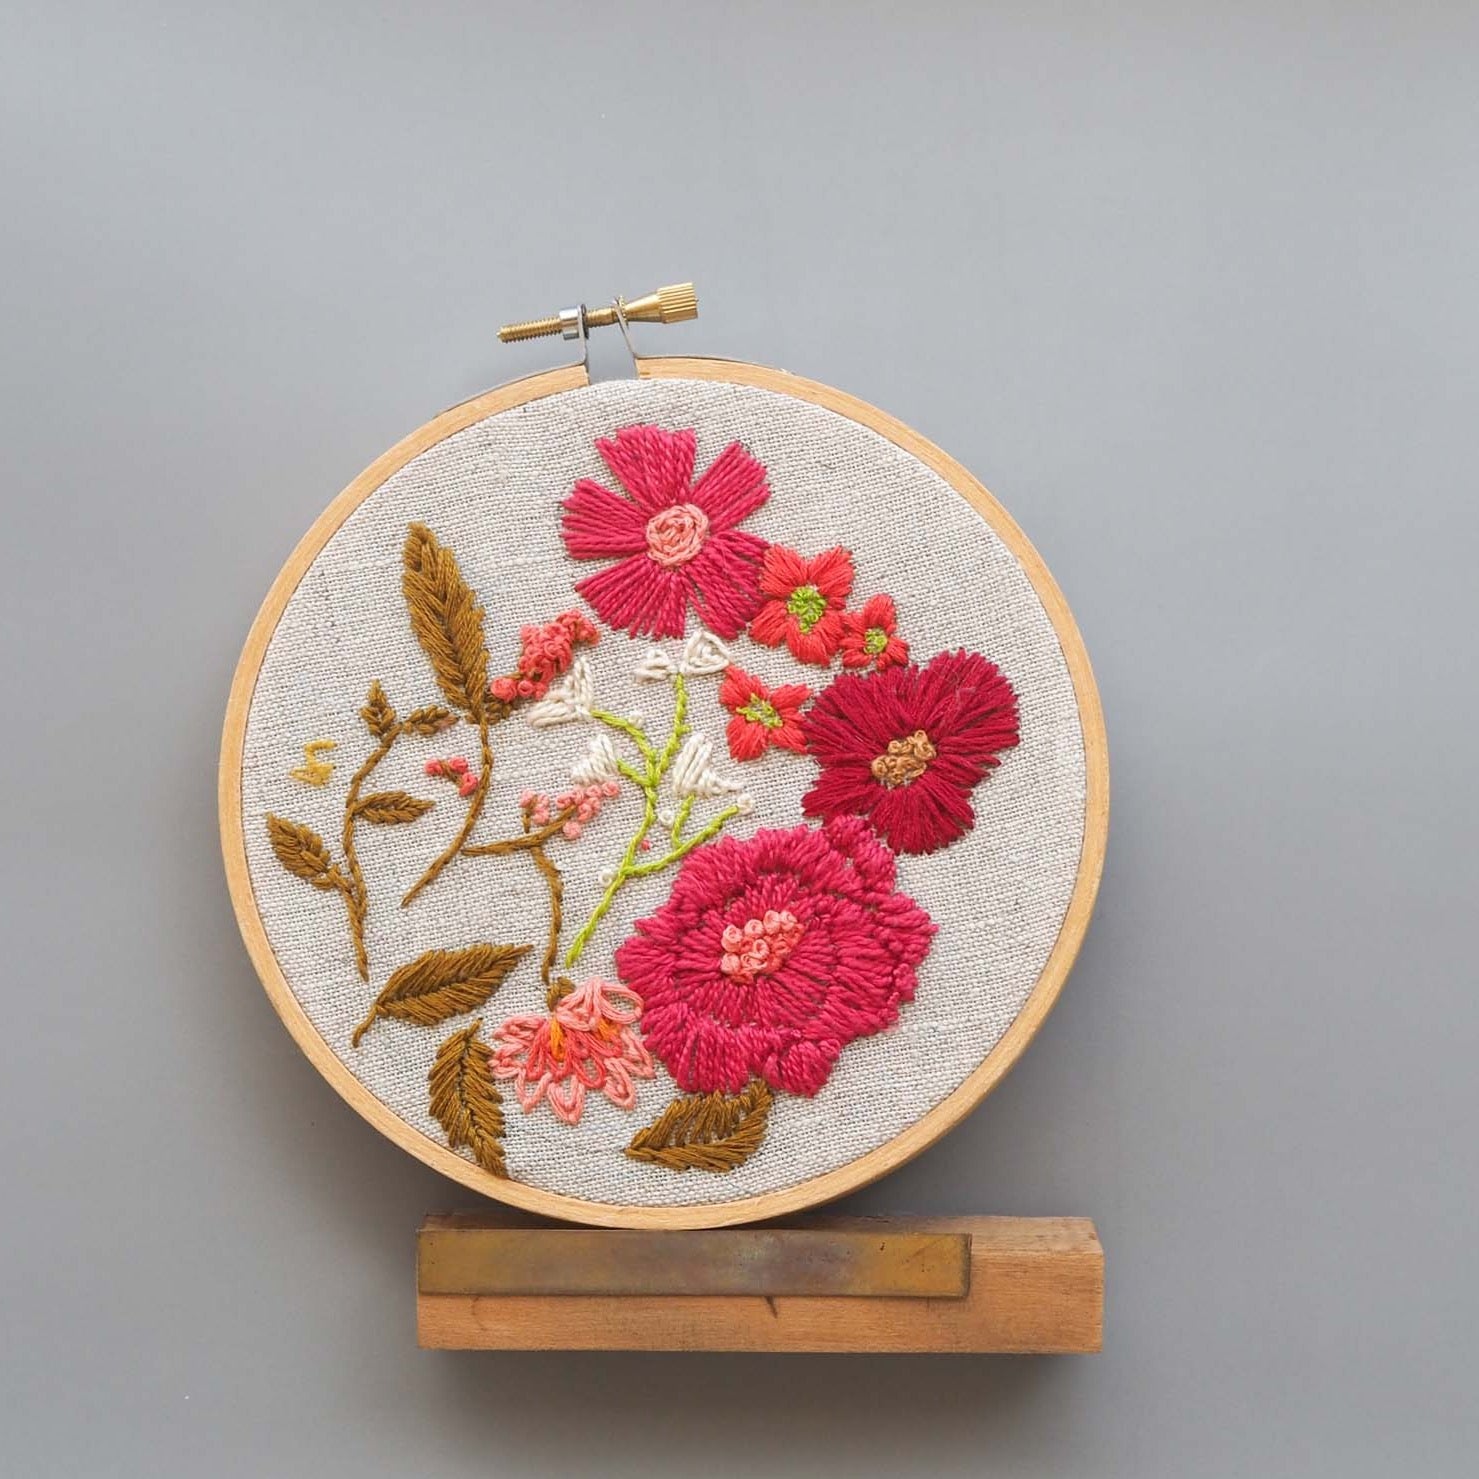 Red and burgundy floral pattern stitched on to a 5 inch embroidery hoop against a gray background 